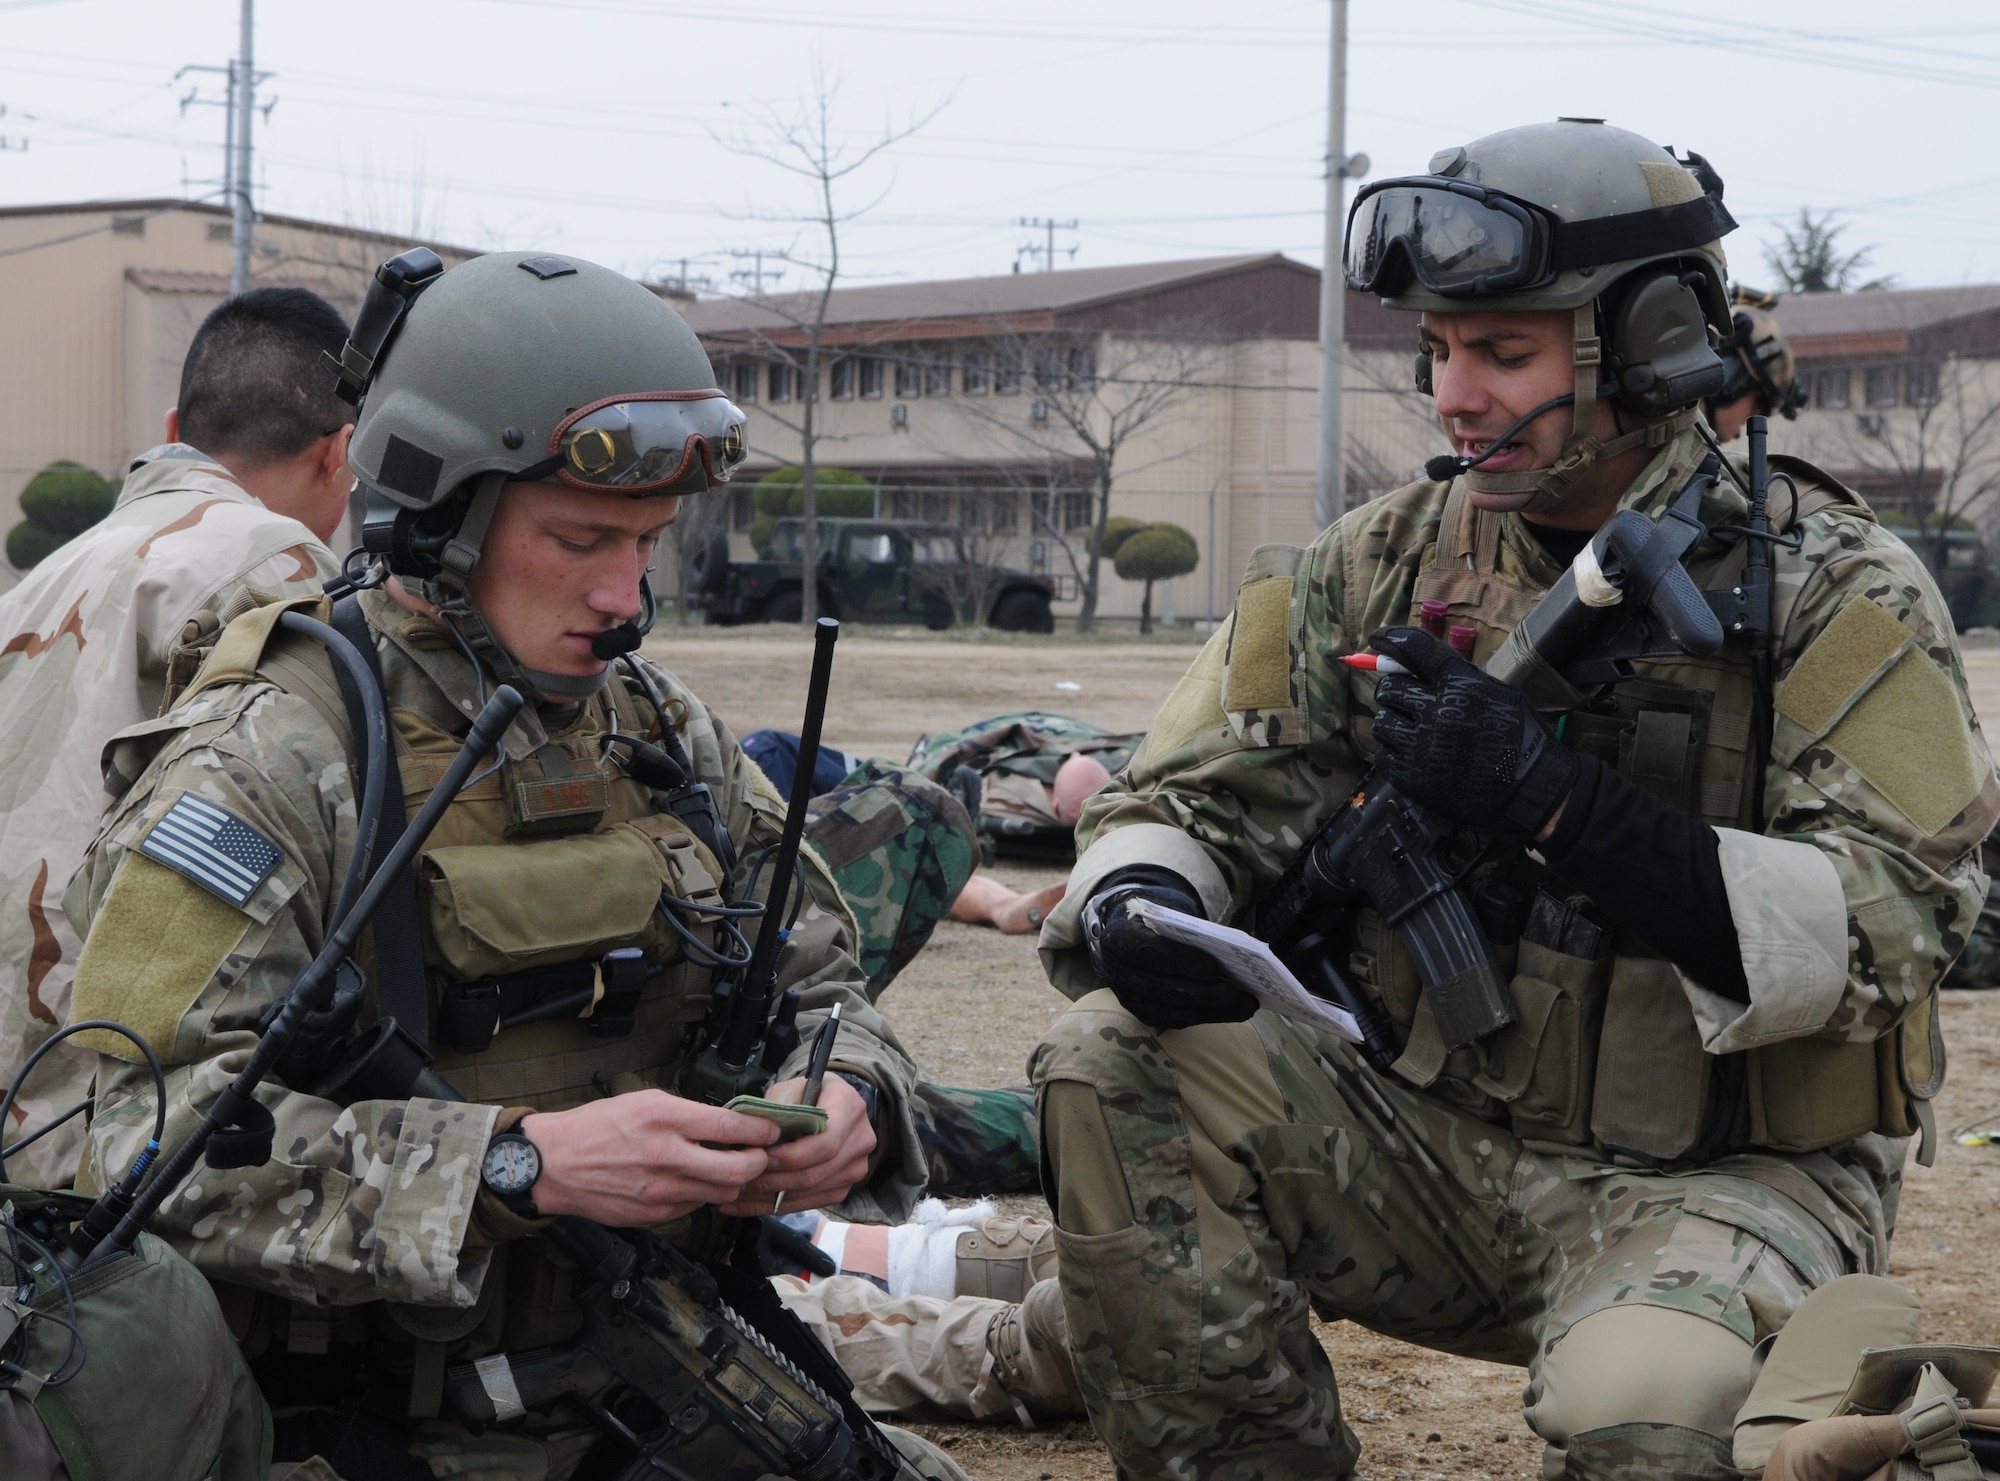 DAEGU AIR BASE, Republic of Korea -- Airmen from the 320th Special Tactics Squadron discuss casualty information during a mass casualty exercise here March 27. The scenario is part of the 353rd Special Operations Group’s annual operational readiness exercise. (U.S. Air Force photo by Tech. Sgt. Aaron Cram)